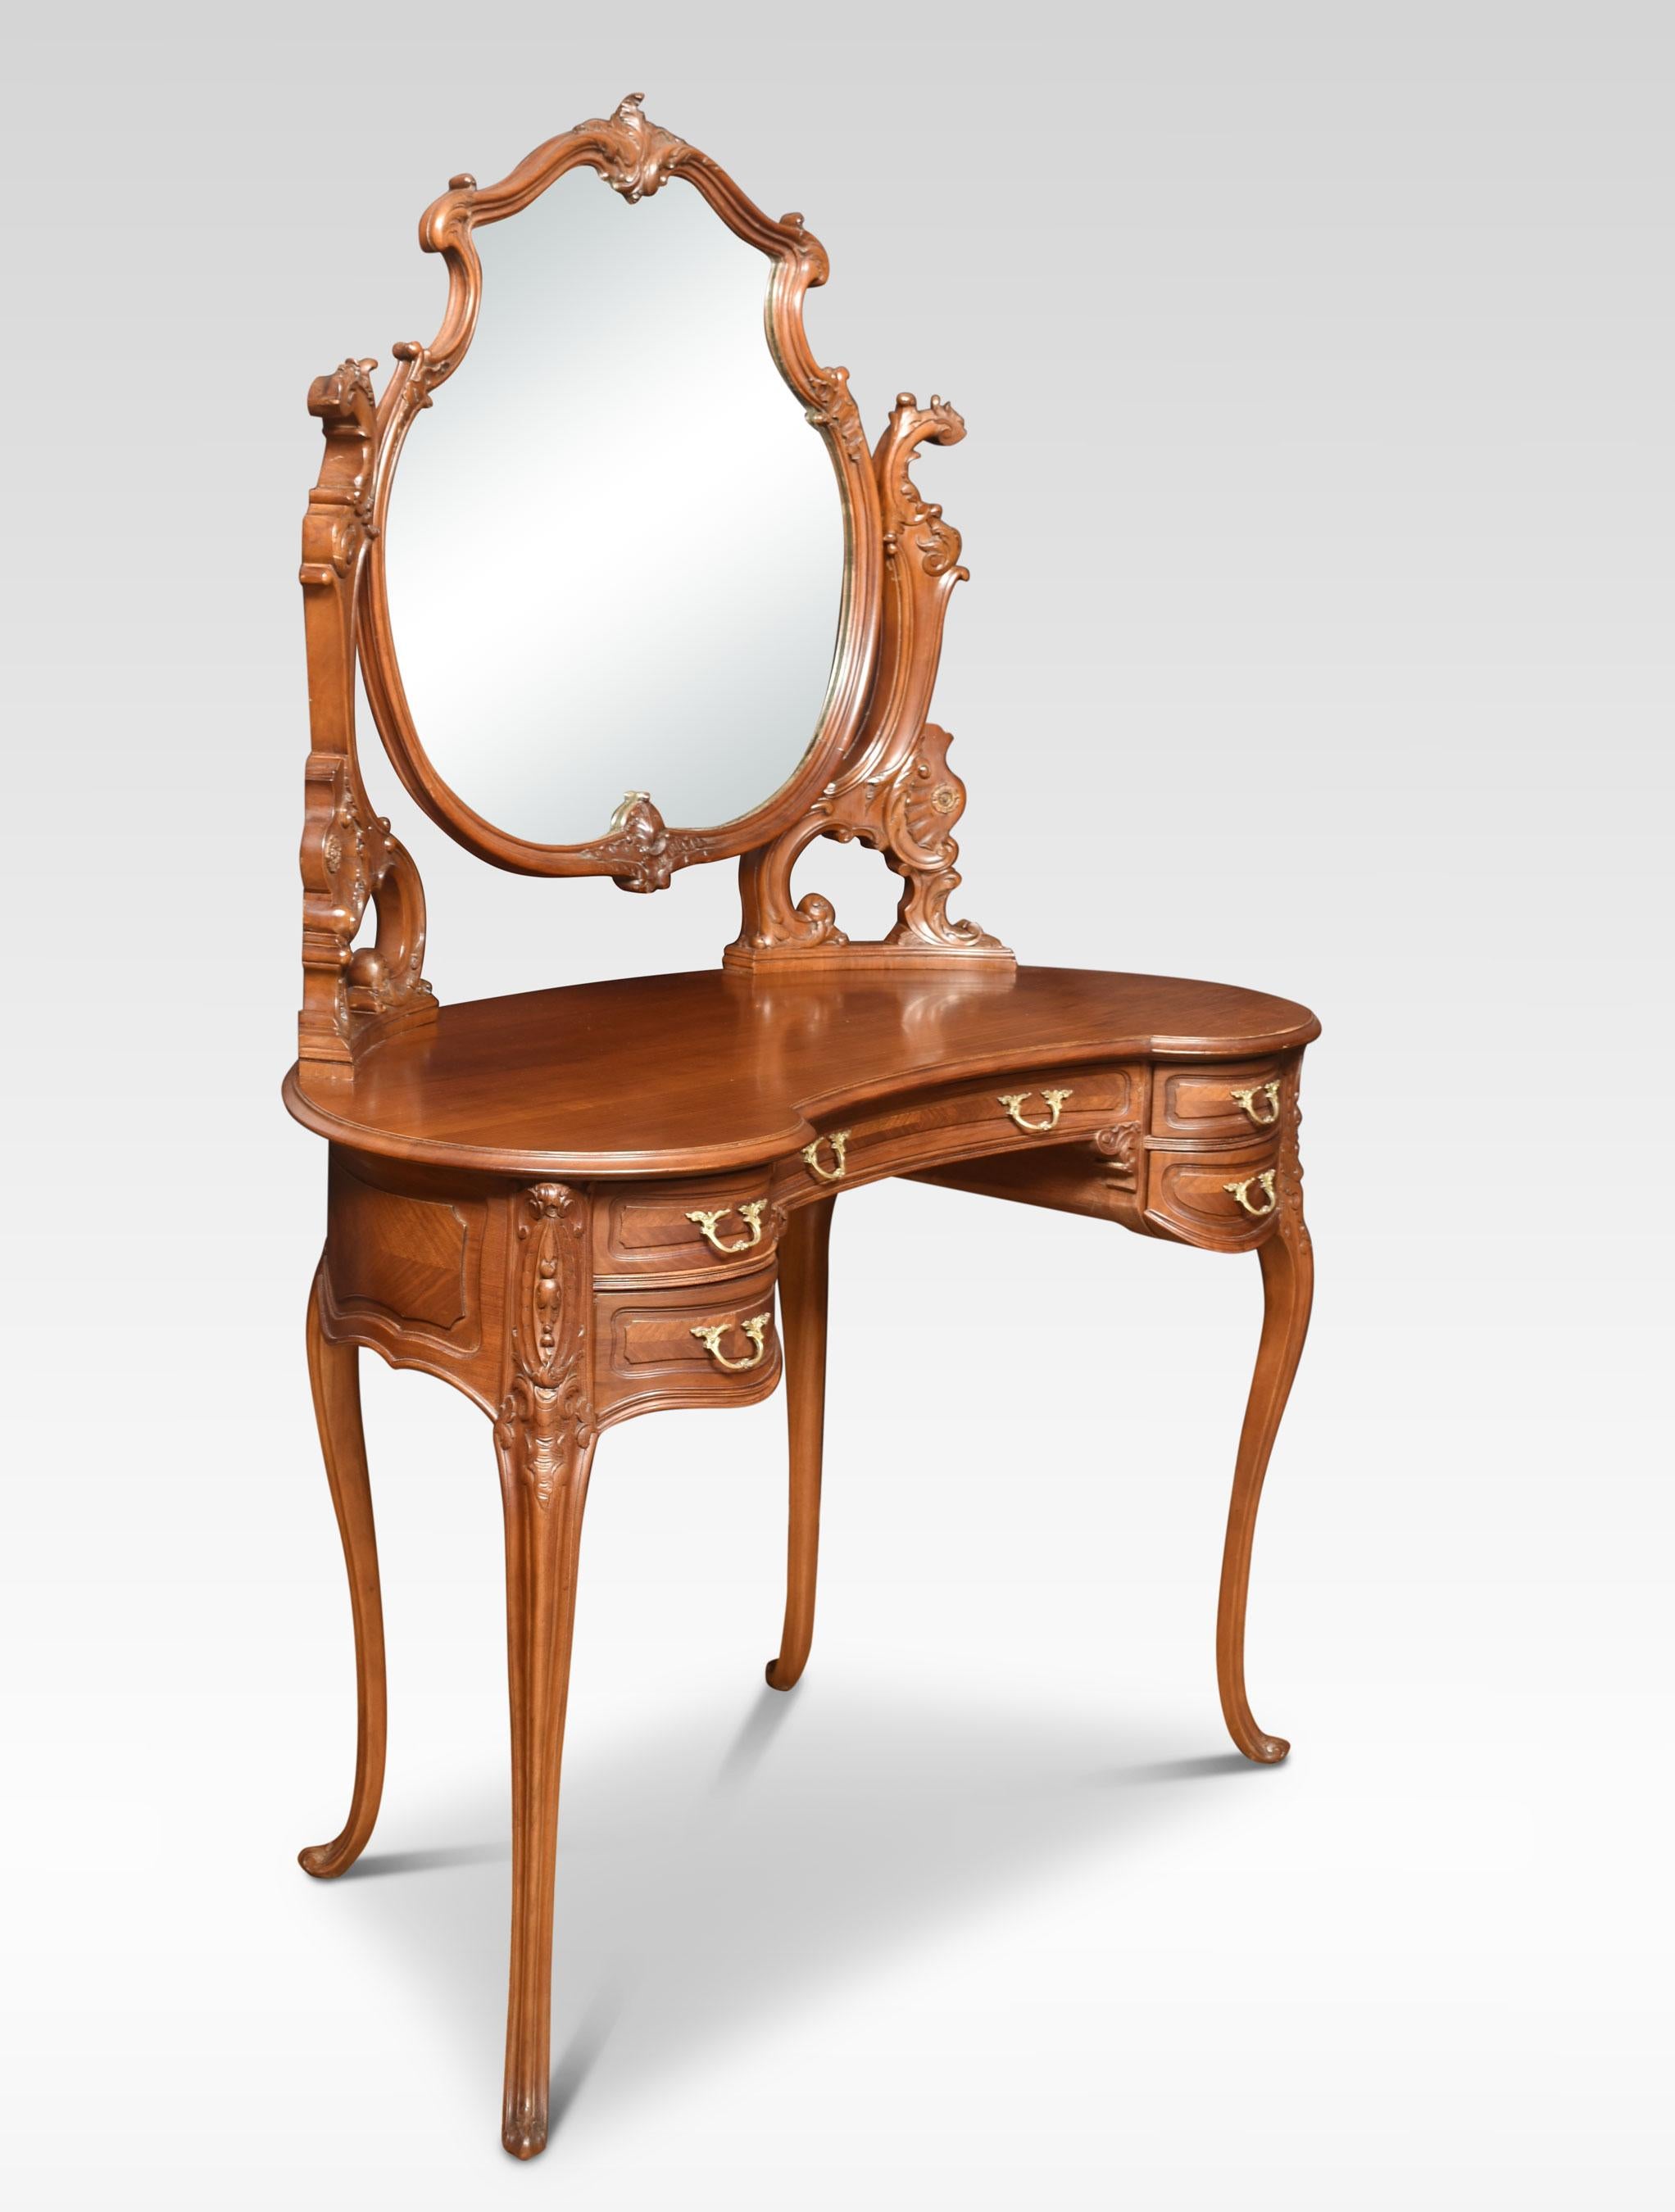 Walnut dressing table the original mirror plate in a carved frame between shaped supports. The walnut top above an arrangement of drawers with brass handles. All raised up on slender cabriolet supports.
Dimensions
Height 65.5 inches
Width 45